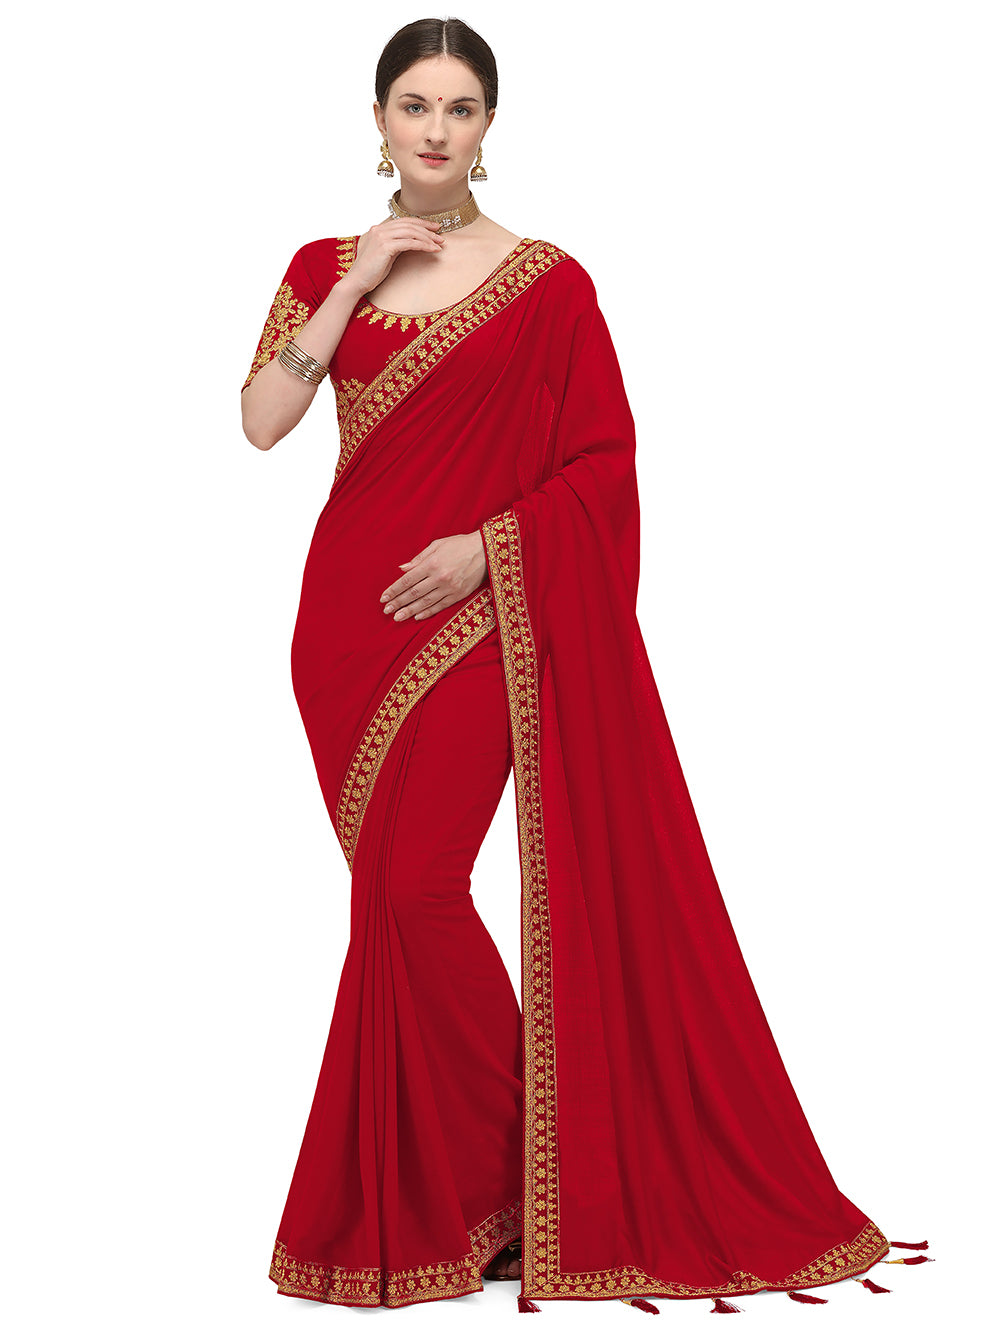 Women's Ahir Embroidery Work Border Wedding Wear Dupion Silk Saree With Blouse Piece (Red) - NIMIDHYA